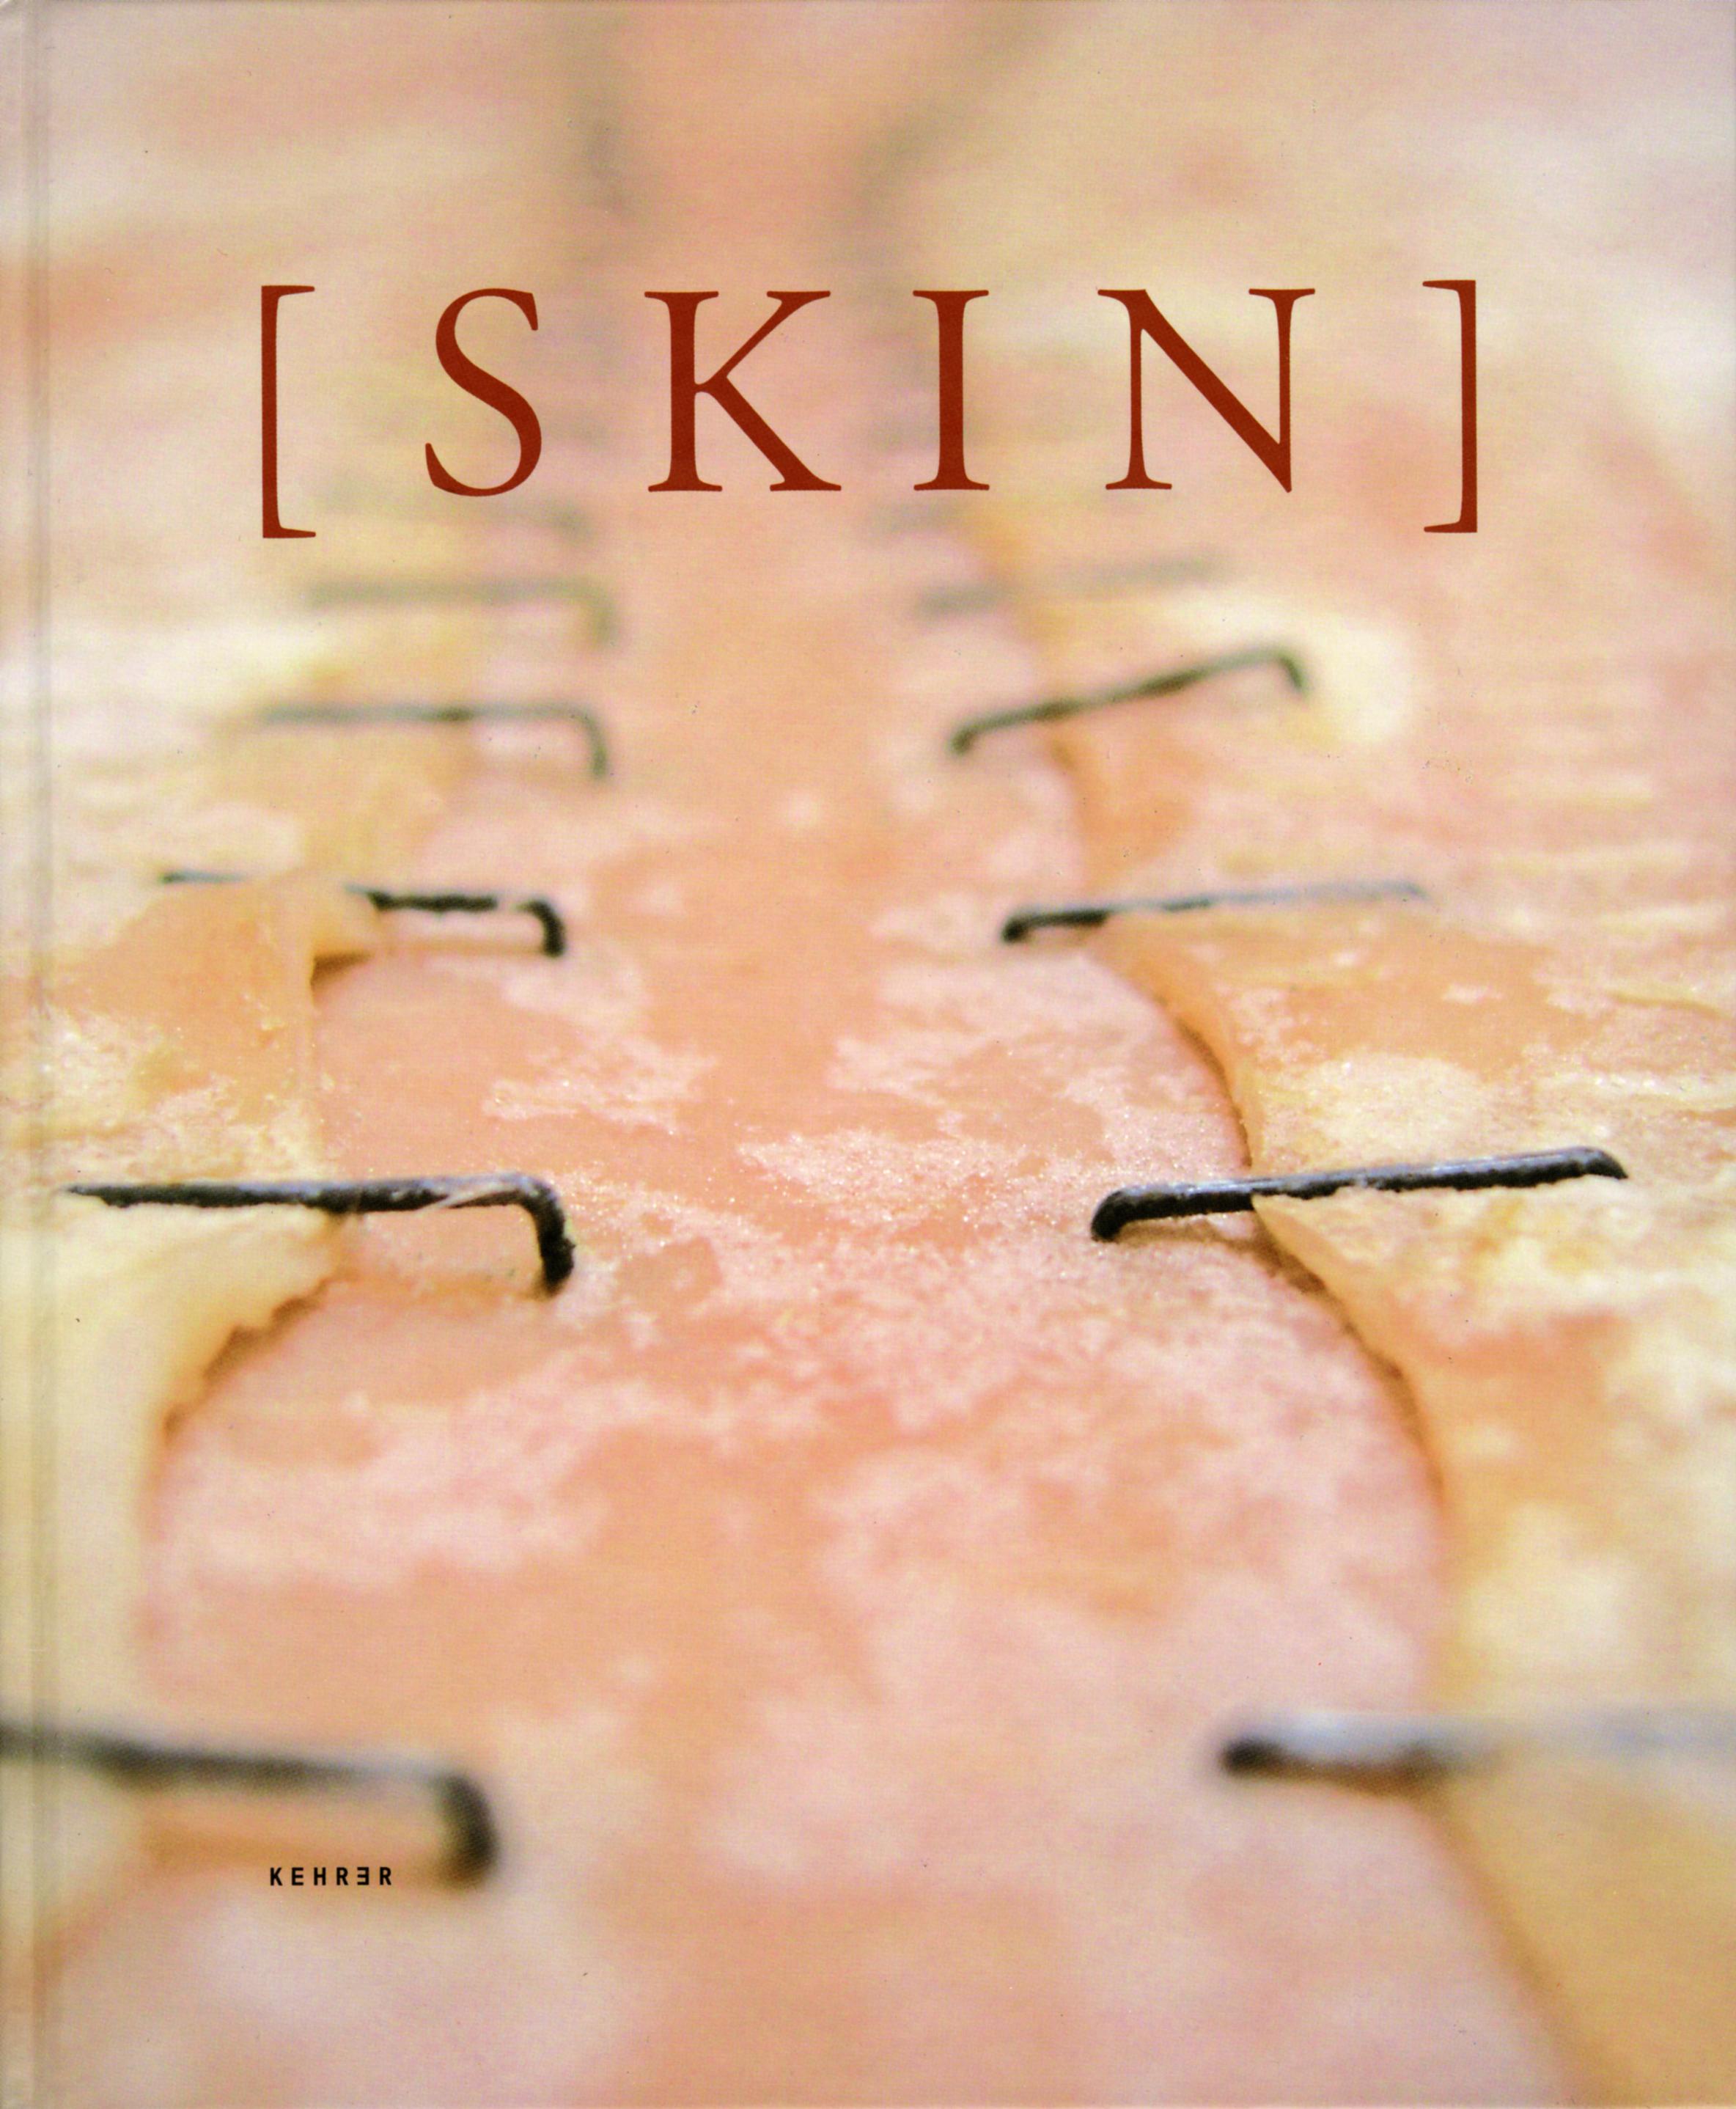 A detailed, microscopic image of skin with [SKIN] written over it.